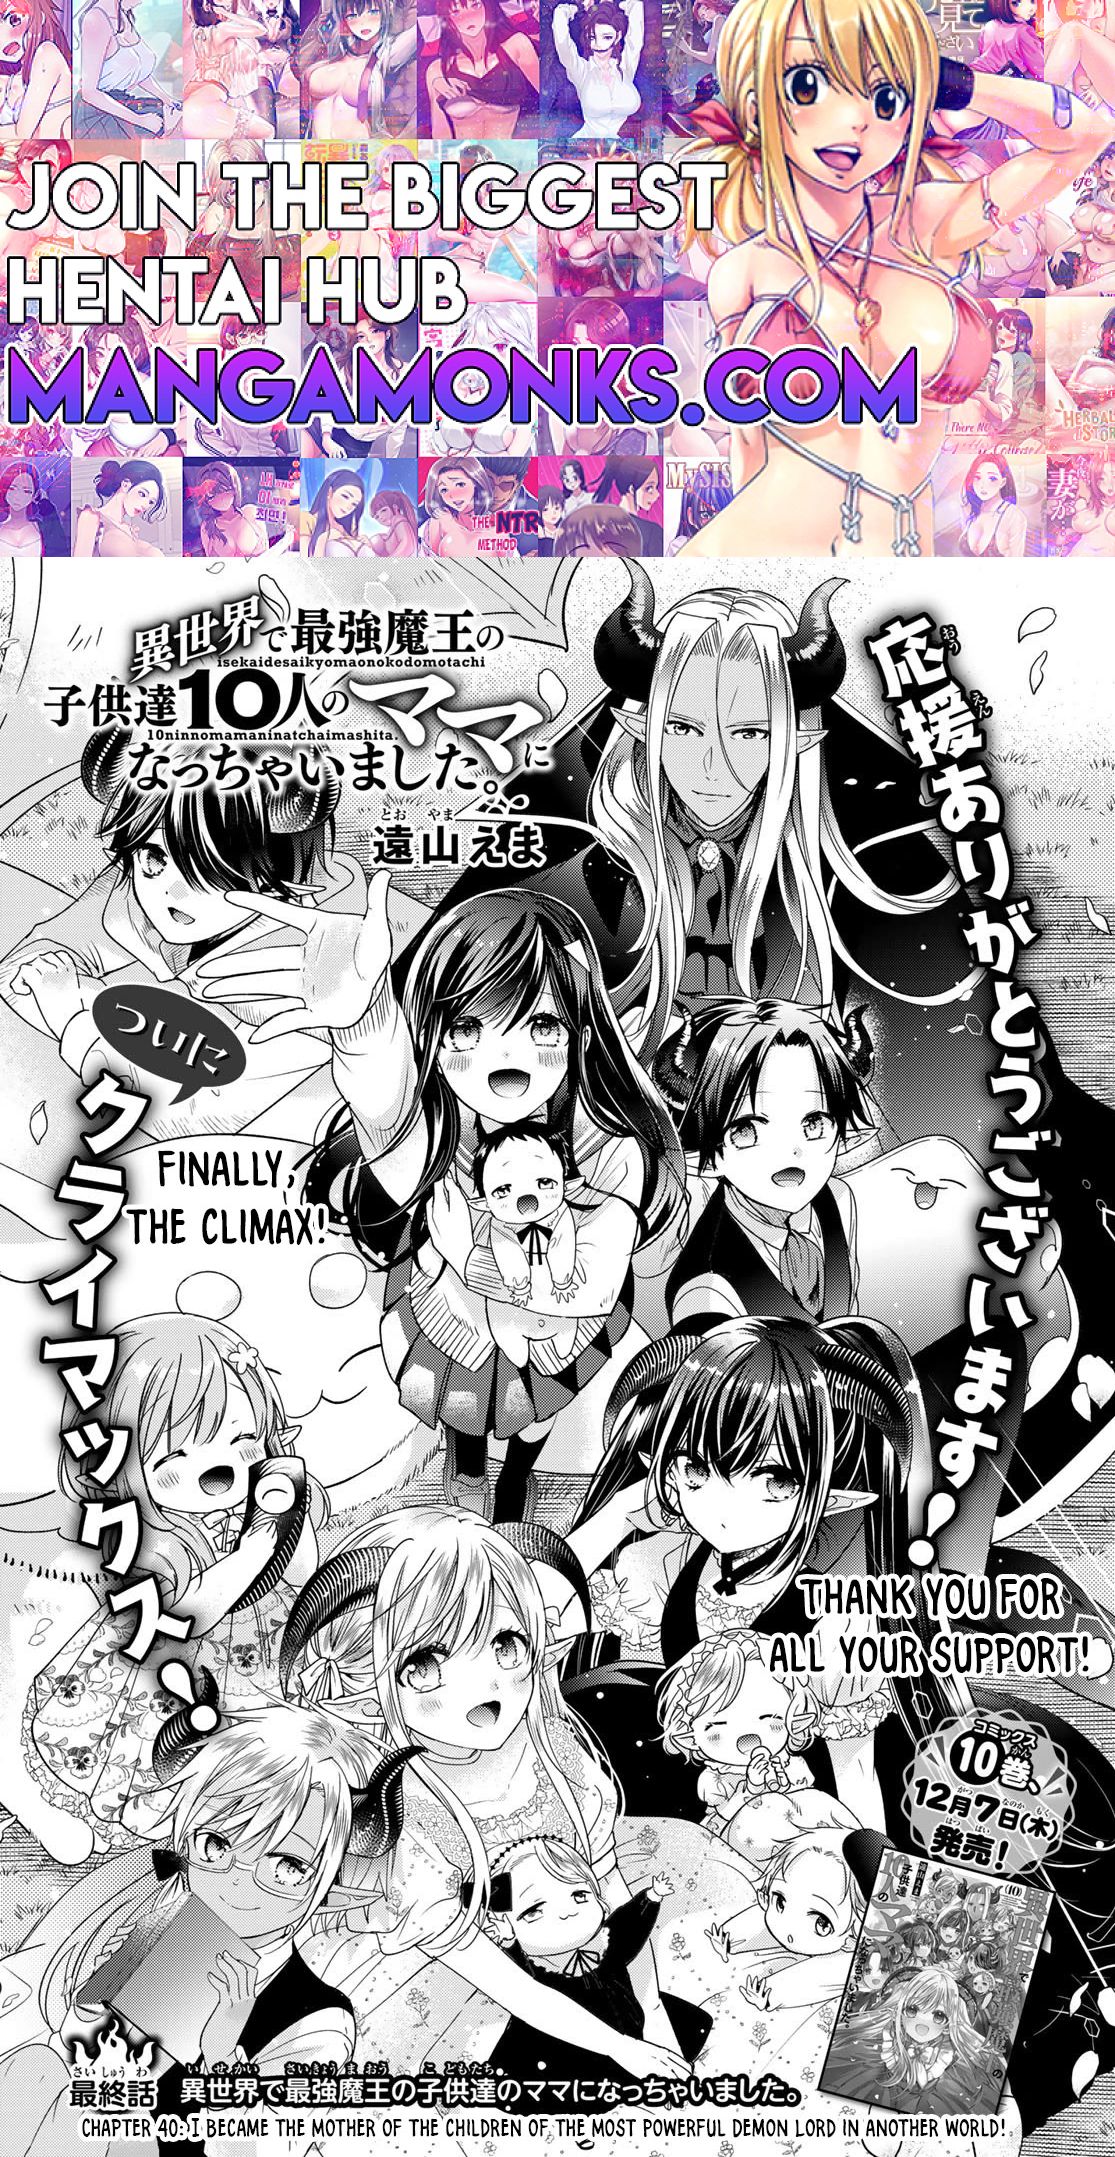 I Became the Mother of the Strongest Demon Lord's 10 Children in Another World. Chapter 40